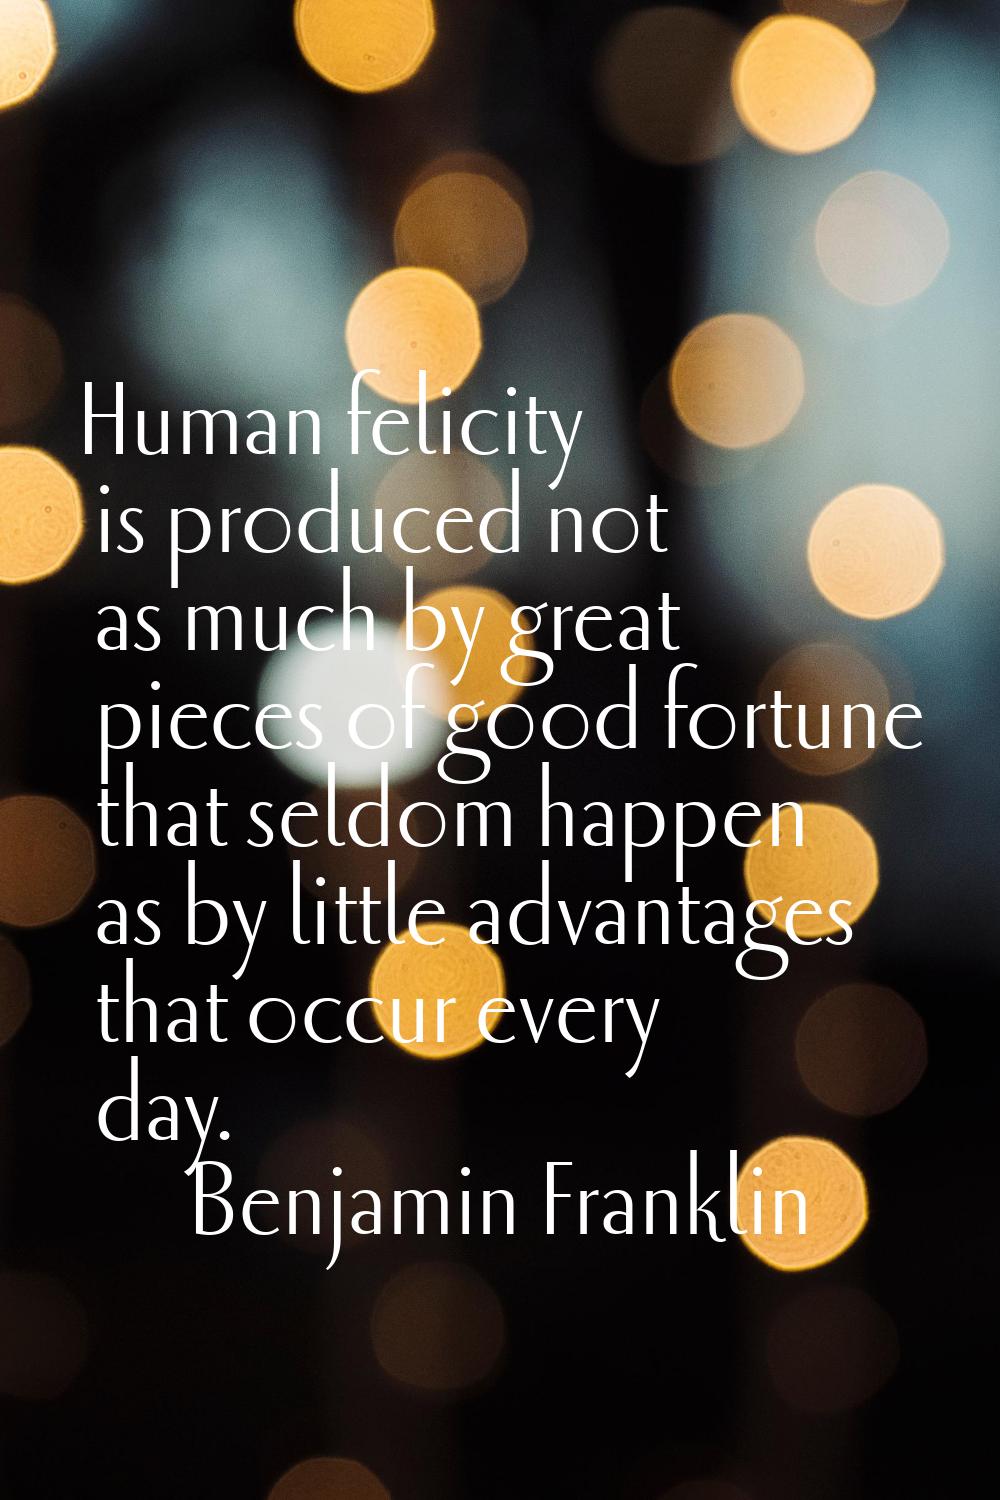 Human felicity is produced not as much by great pieces of good fortune that seldom happen as by lit